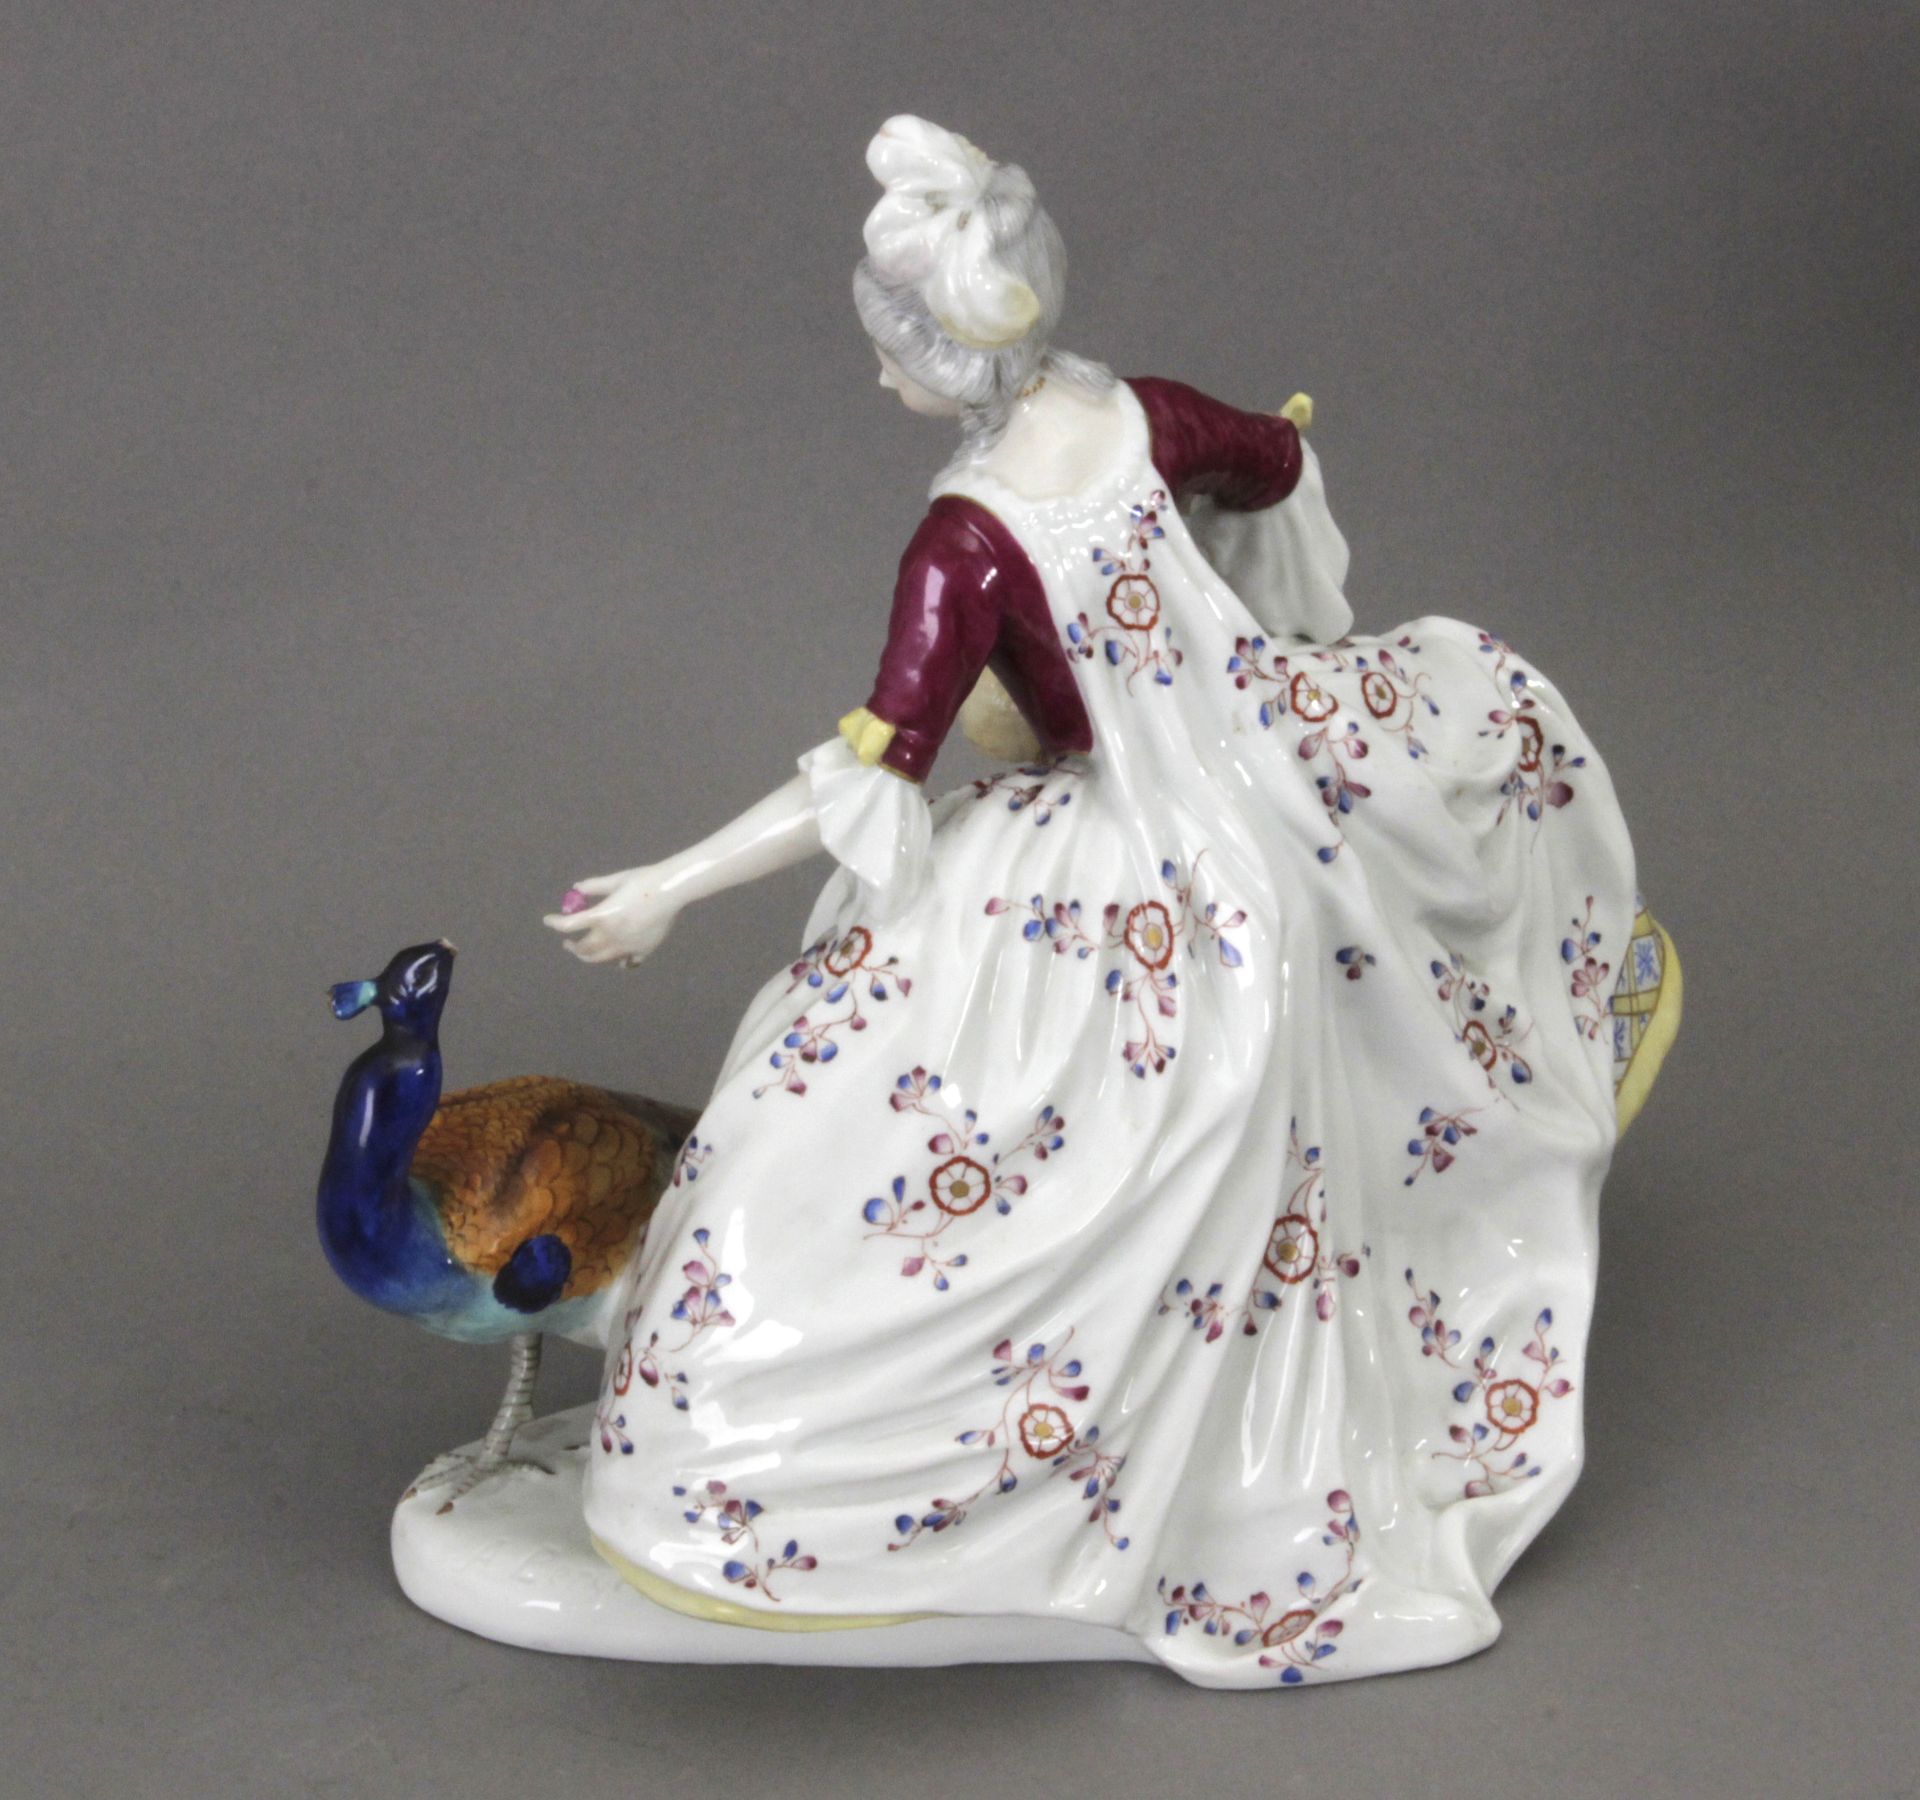 Early 20th century dame figurine in German porcelain signed A. Berger - Image 2 of 3